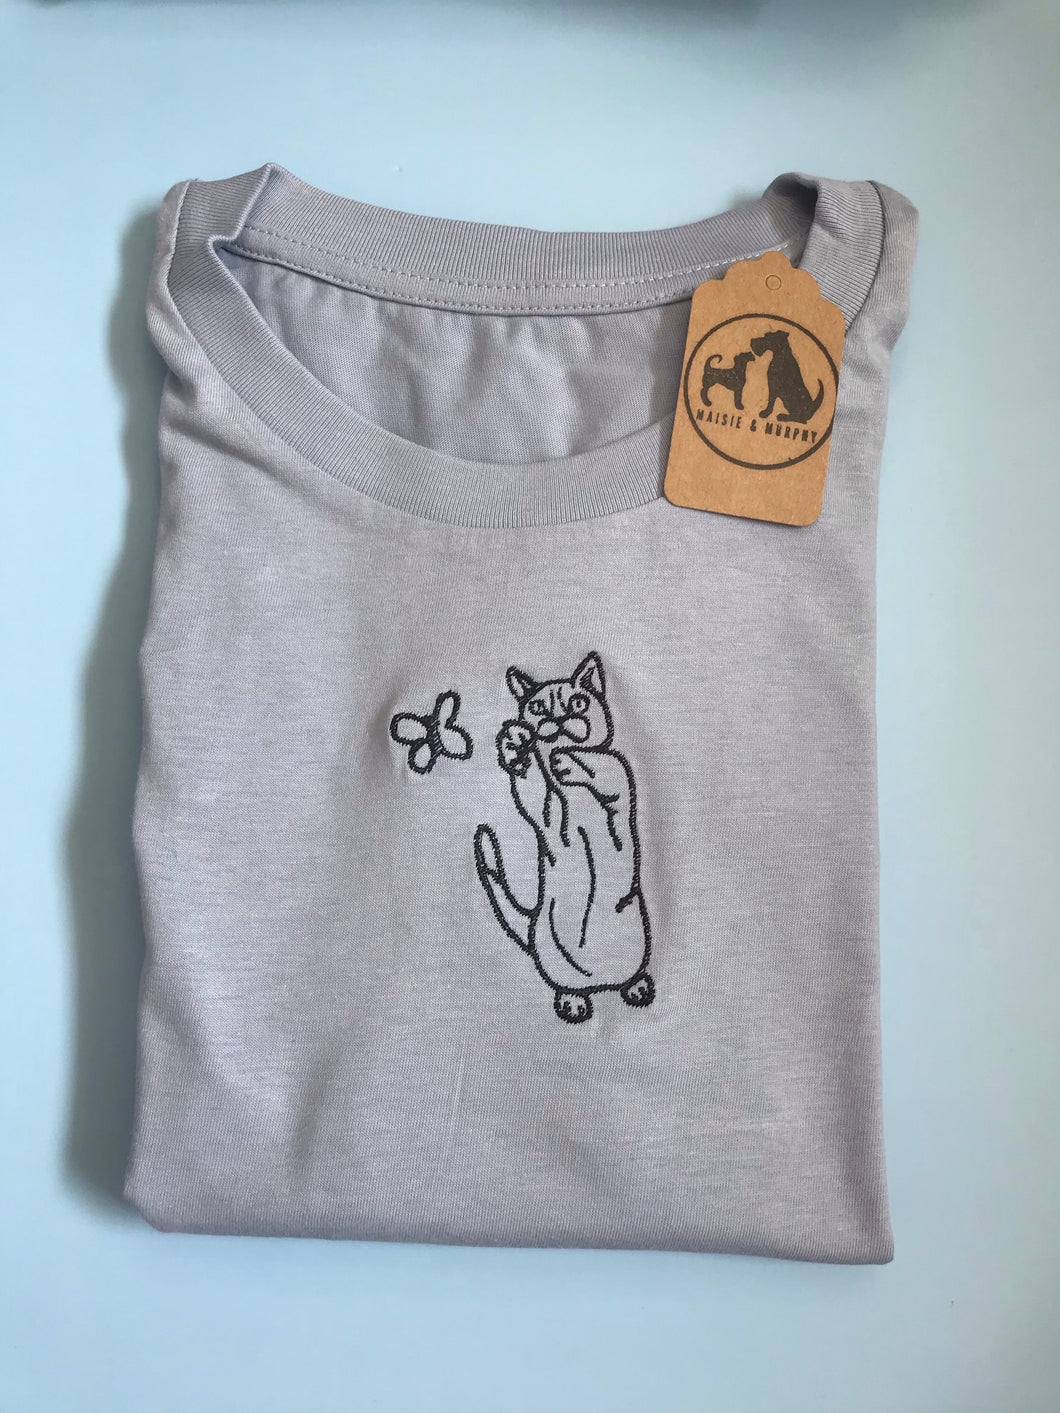 Cat and butterfly Organic T-shirt- Gifts for cat lovers and owners.